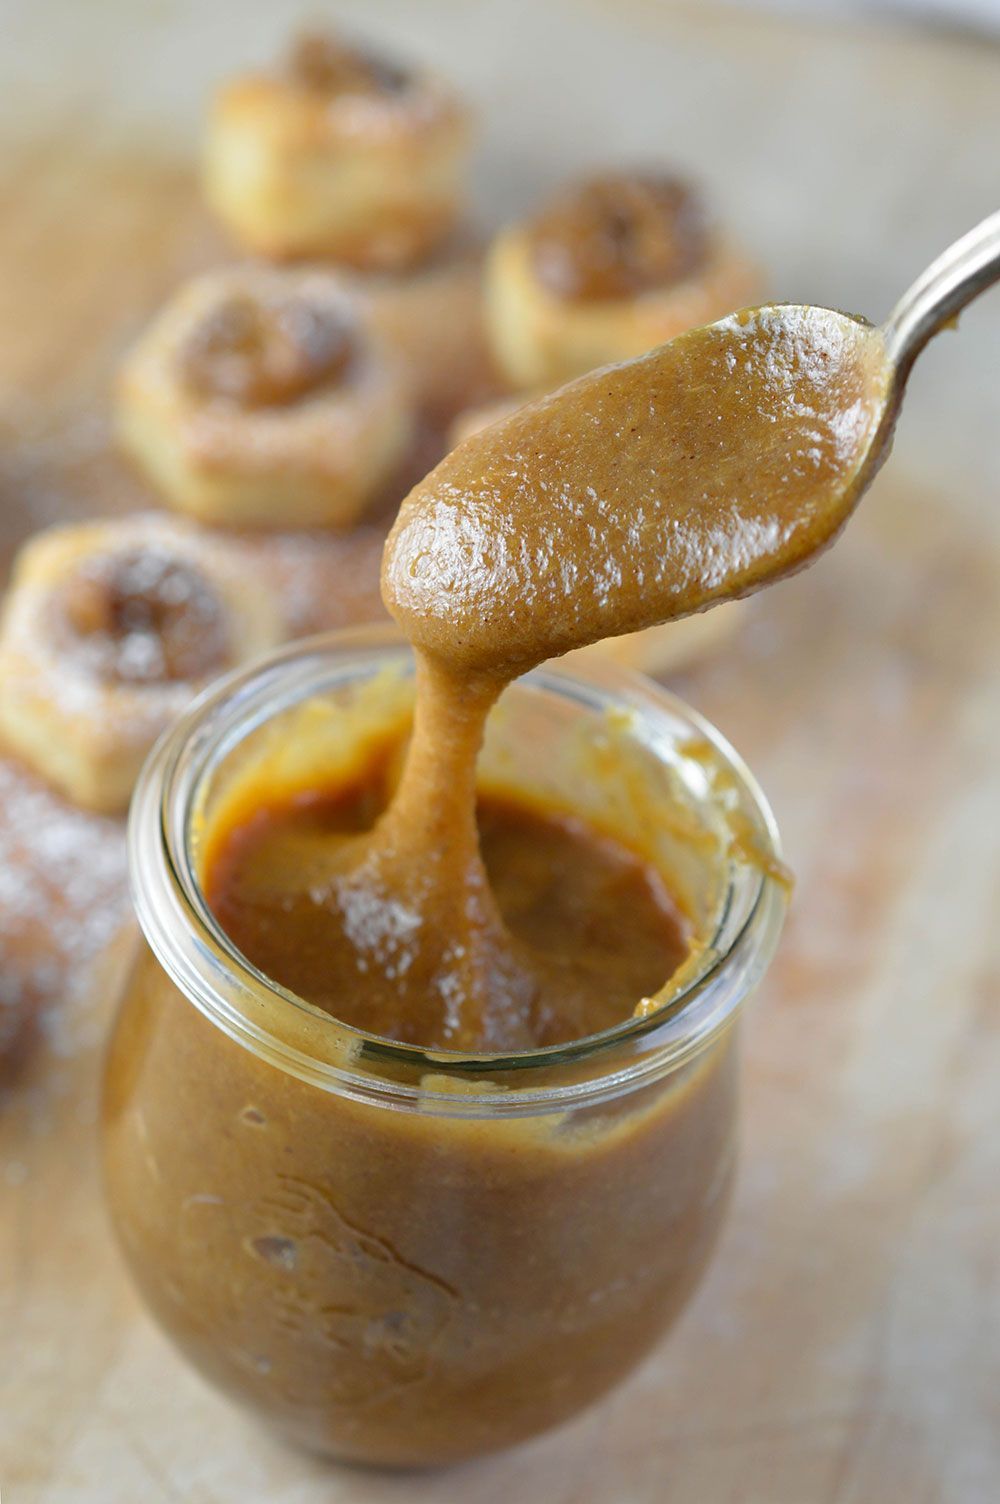 This Easy Apple Curd Recipe makes a cinnamon and apple flavored curd that is perfect for so many desserts! This unique curd is made with apple butter and cinnamon then served in puff pastry cups. -   25 unique apple recipes
 ideas